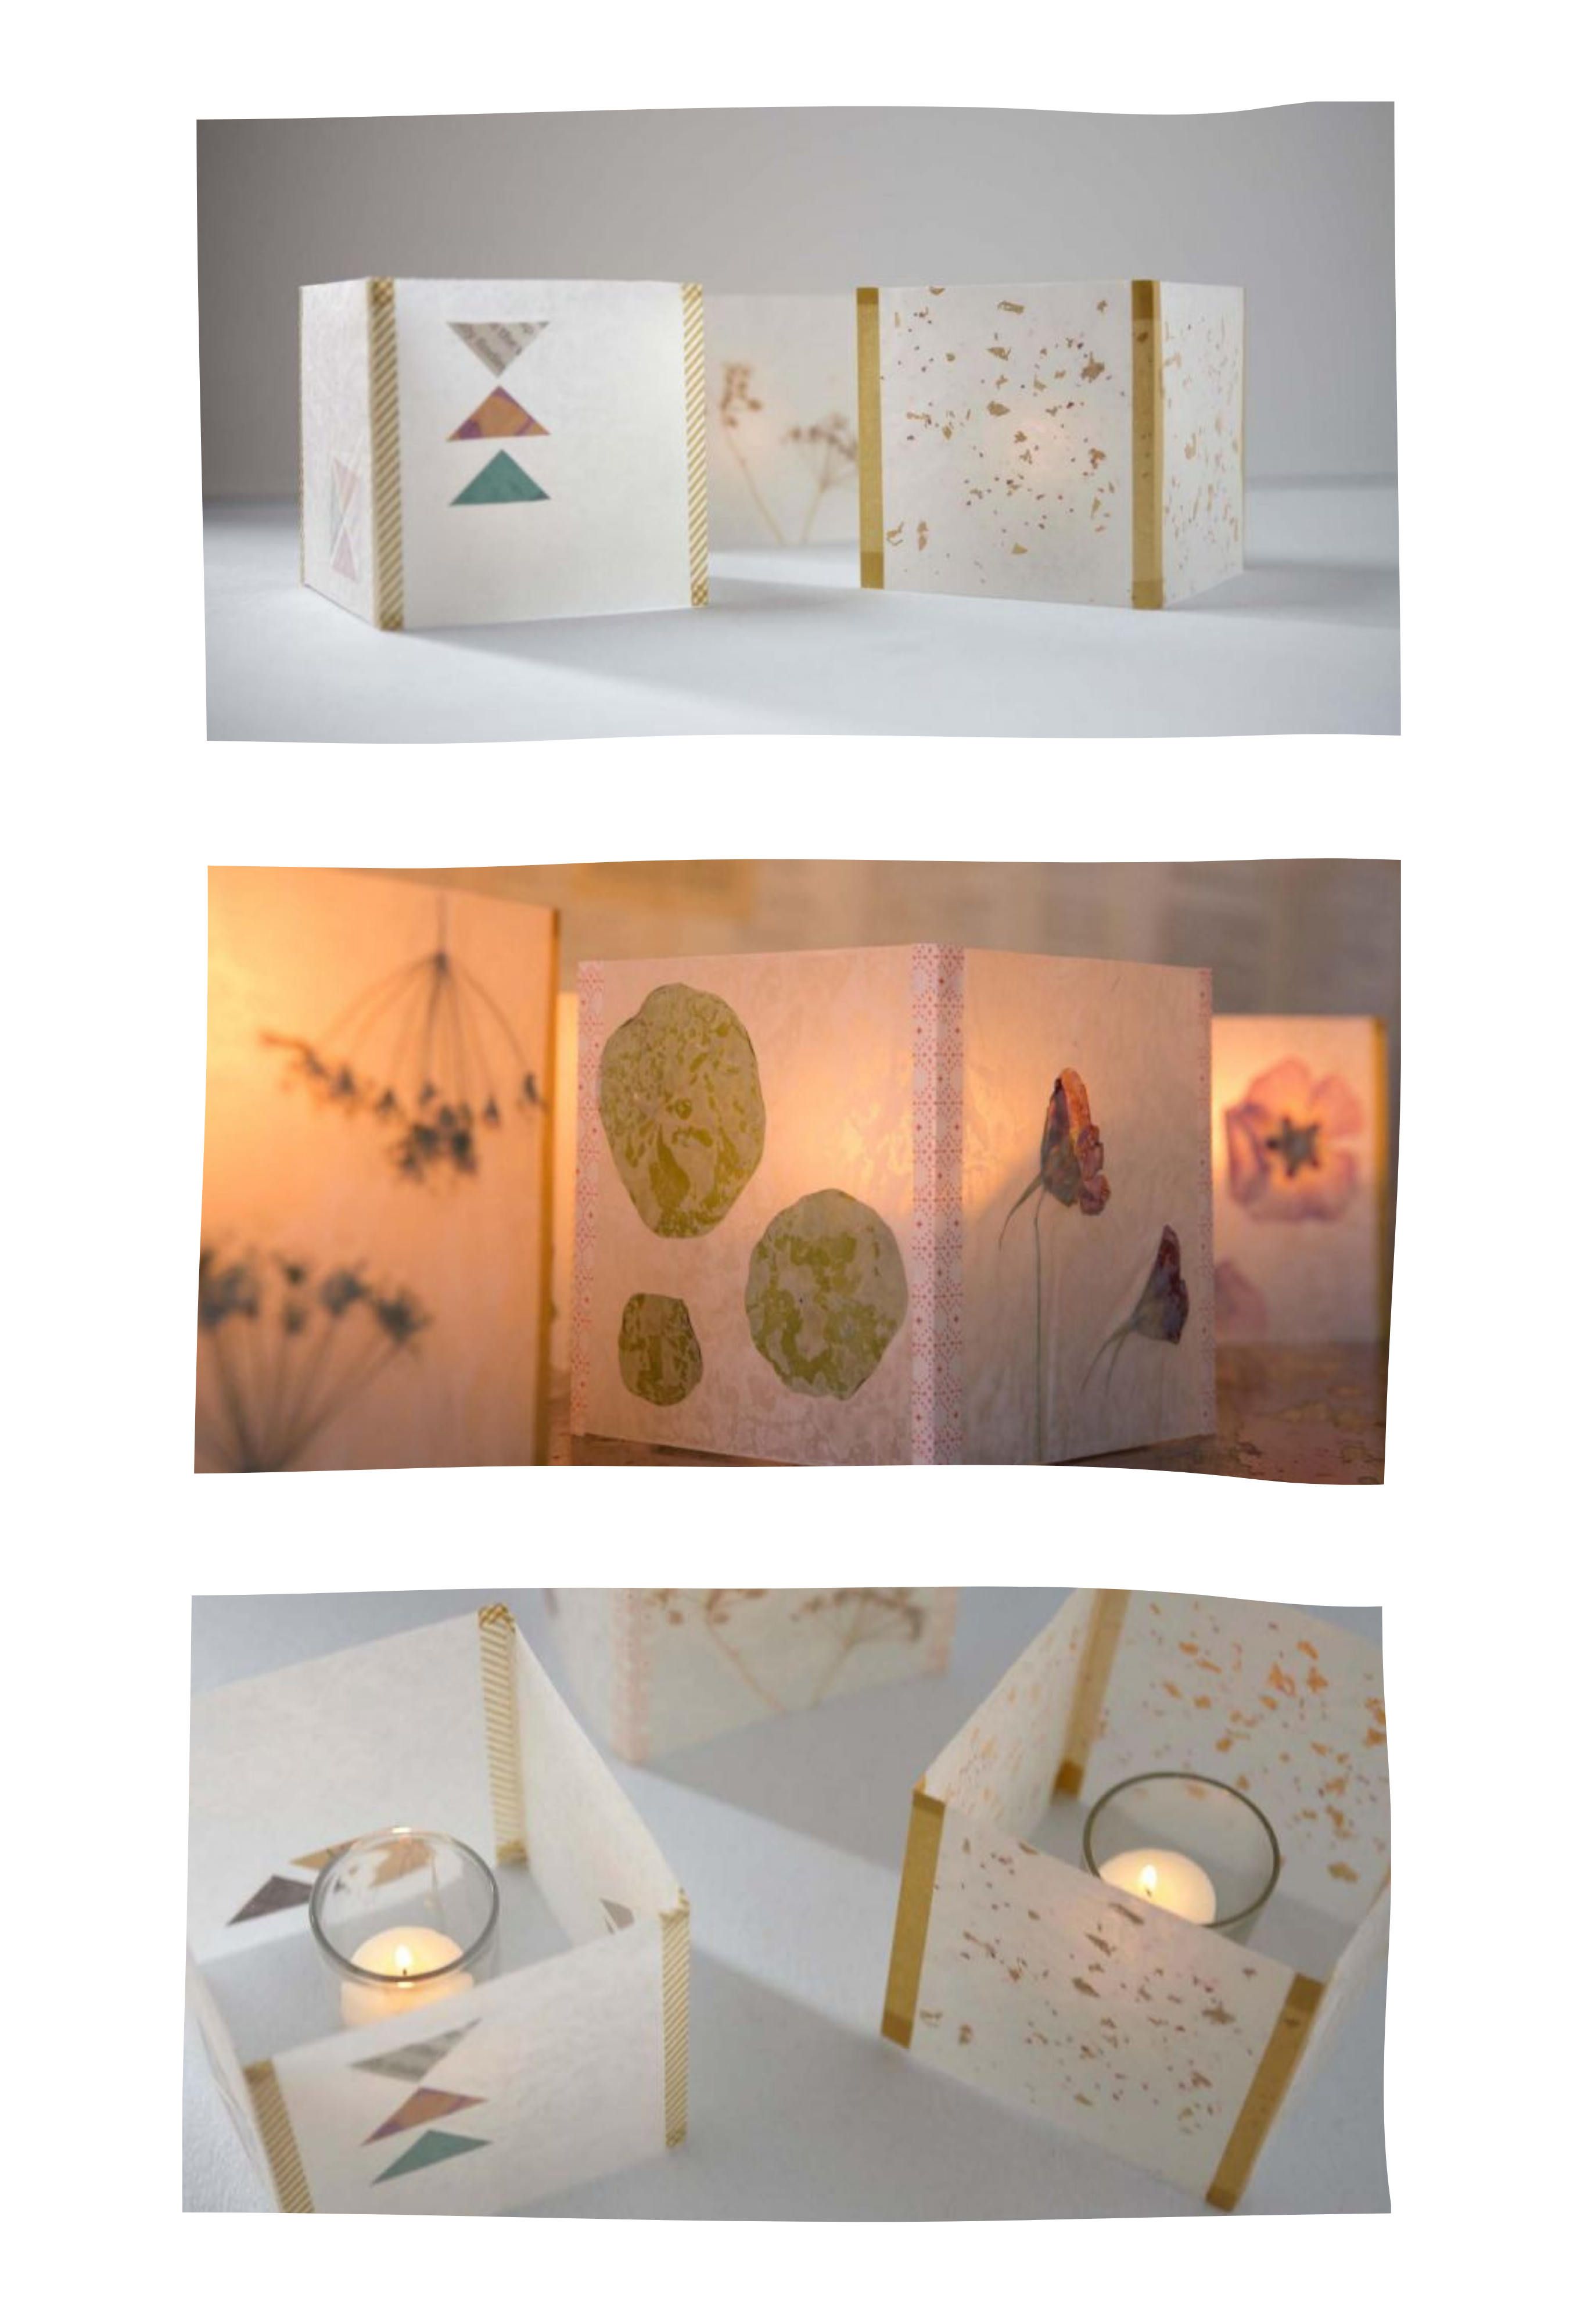 Various luminarias are shown with pressed flowers and leaves, and confetti.